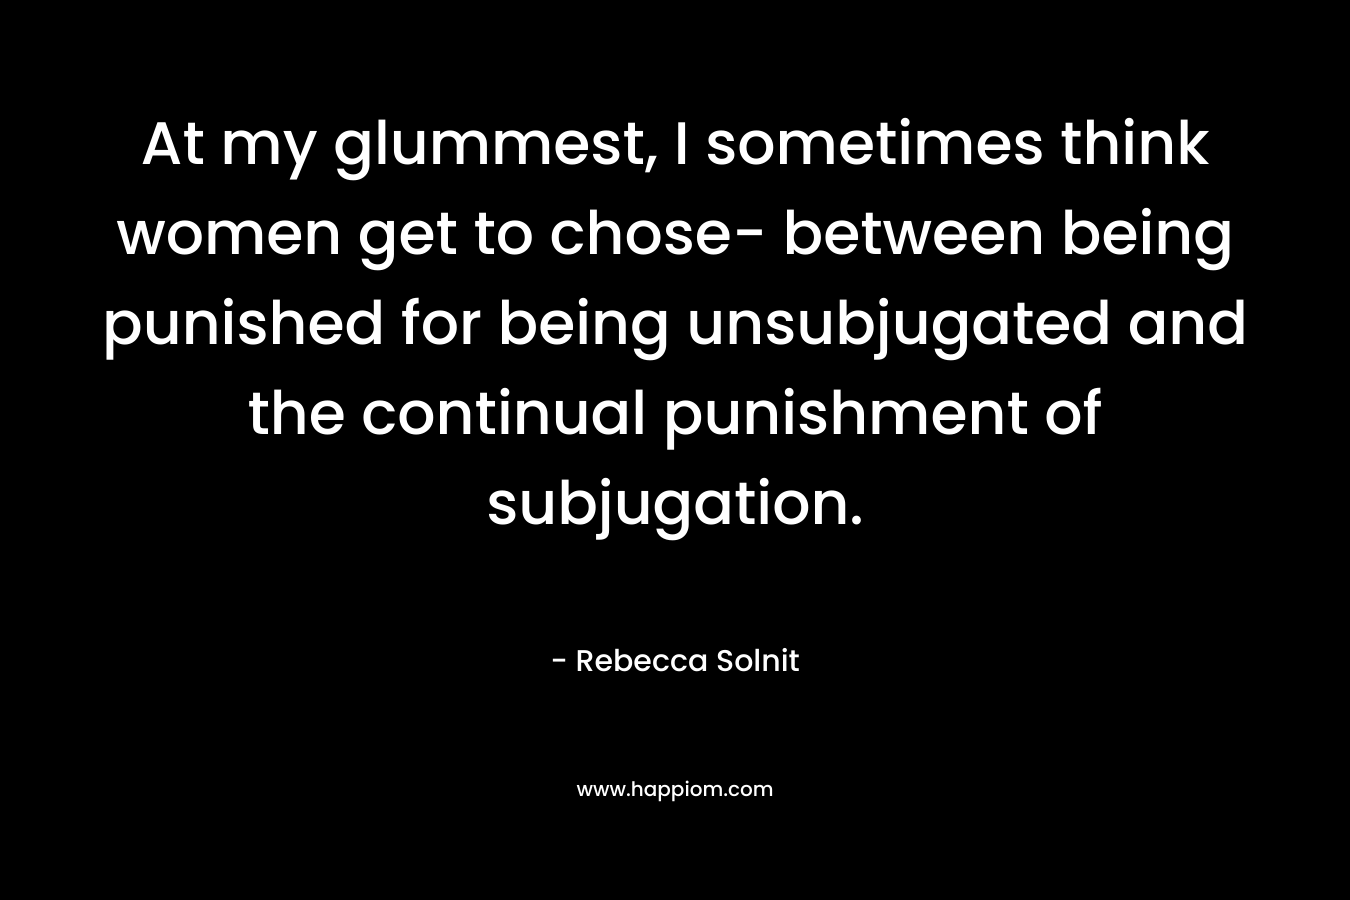 At my glummest, I sometimes think women get to chose- between being punished for being unsubjugated and the continual punishment of subjugation.